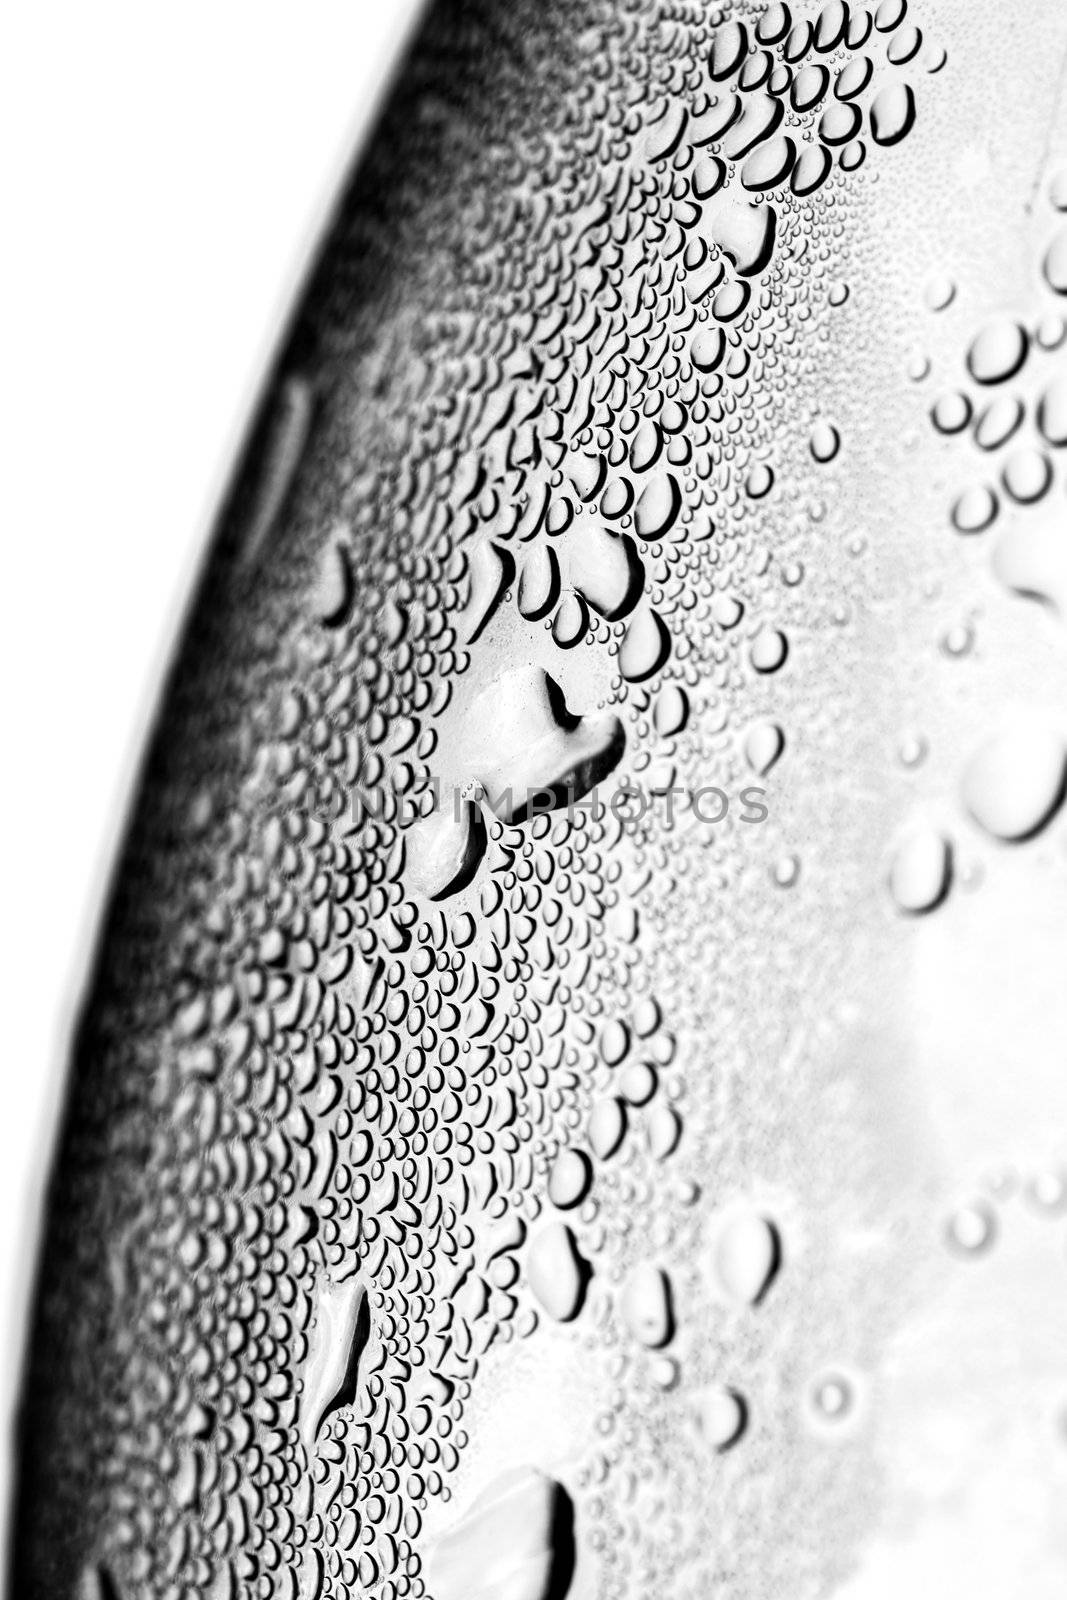 condensation water drops on a plastic surface